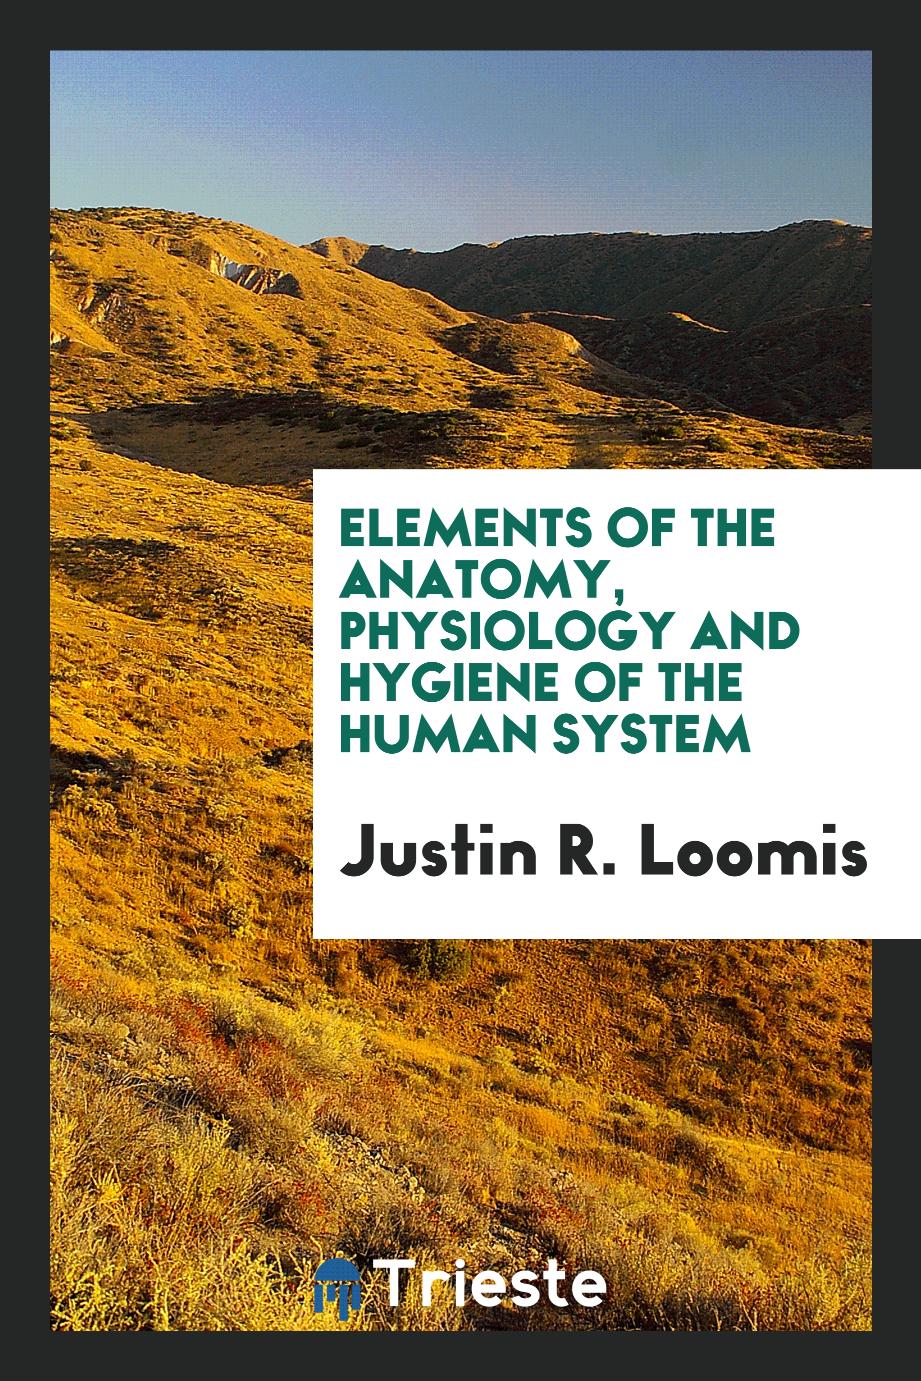 Justin R. Loomis - Elements of the Anatomy, Physiology and Hygiene of the Human System